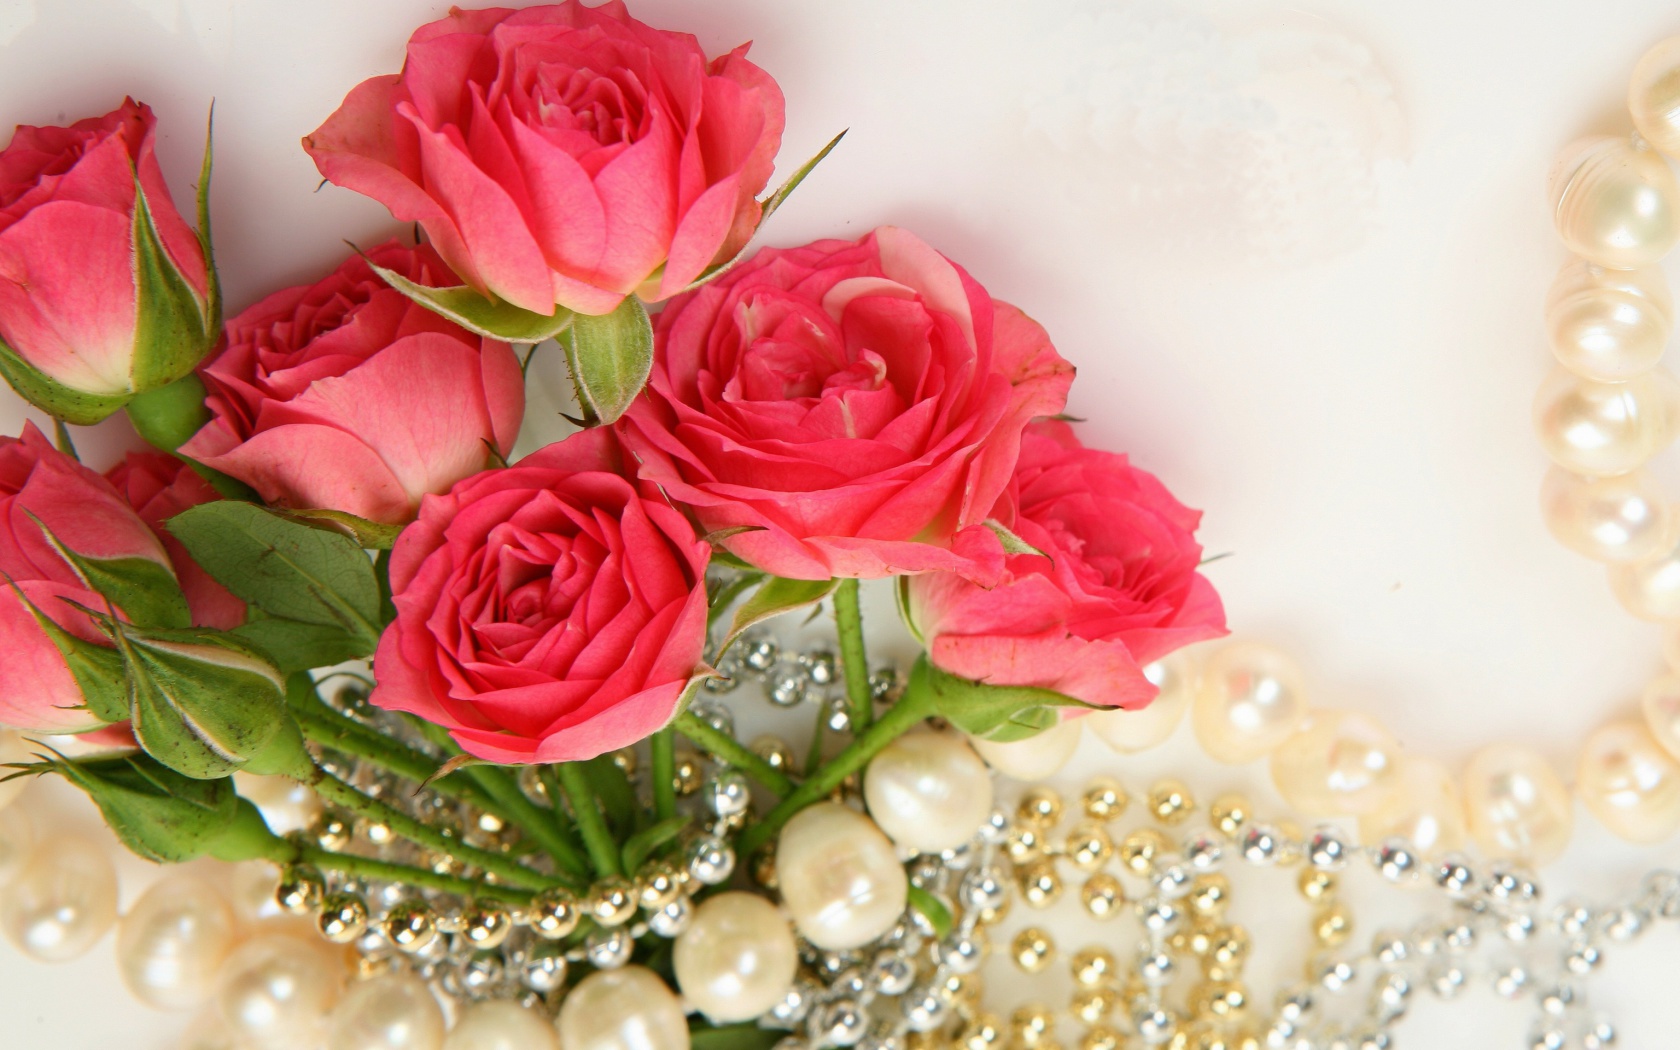 Necklace and Roses Bouquet wallpaper 1680x1050